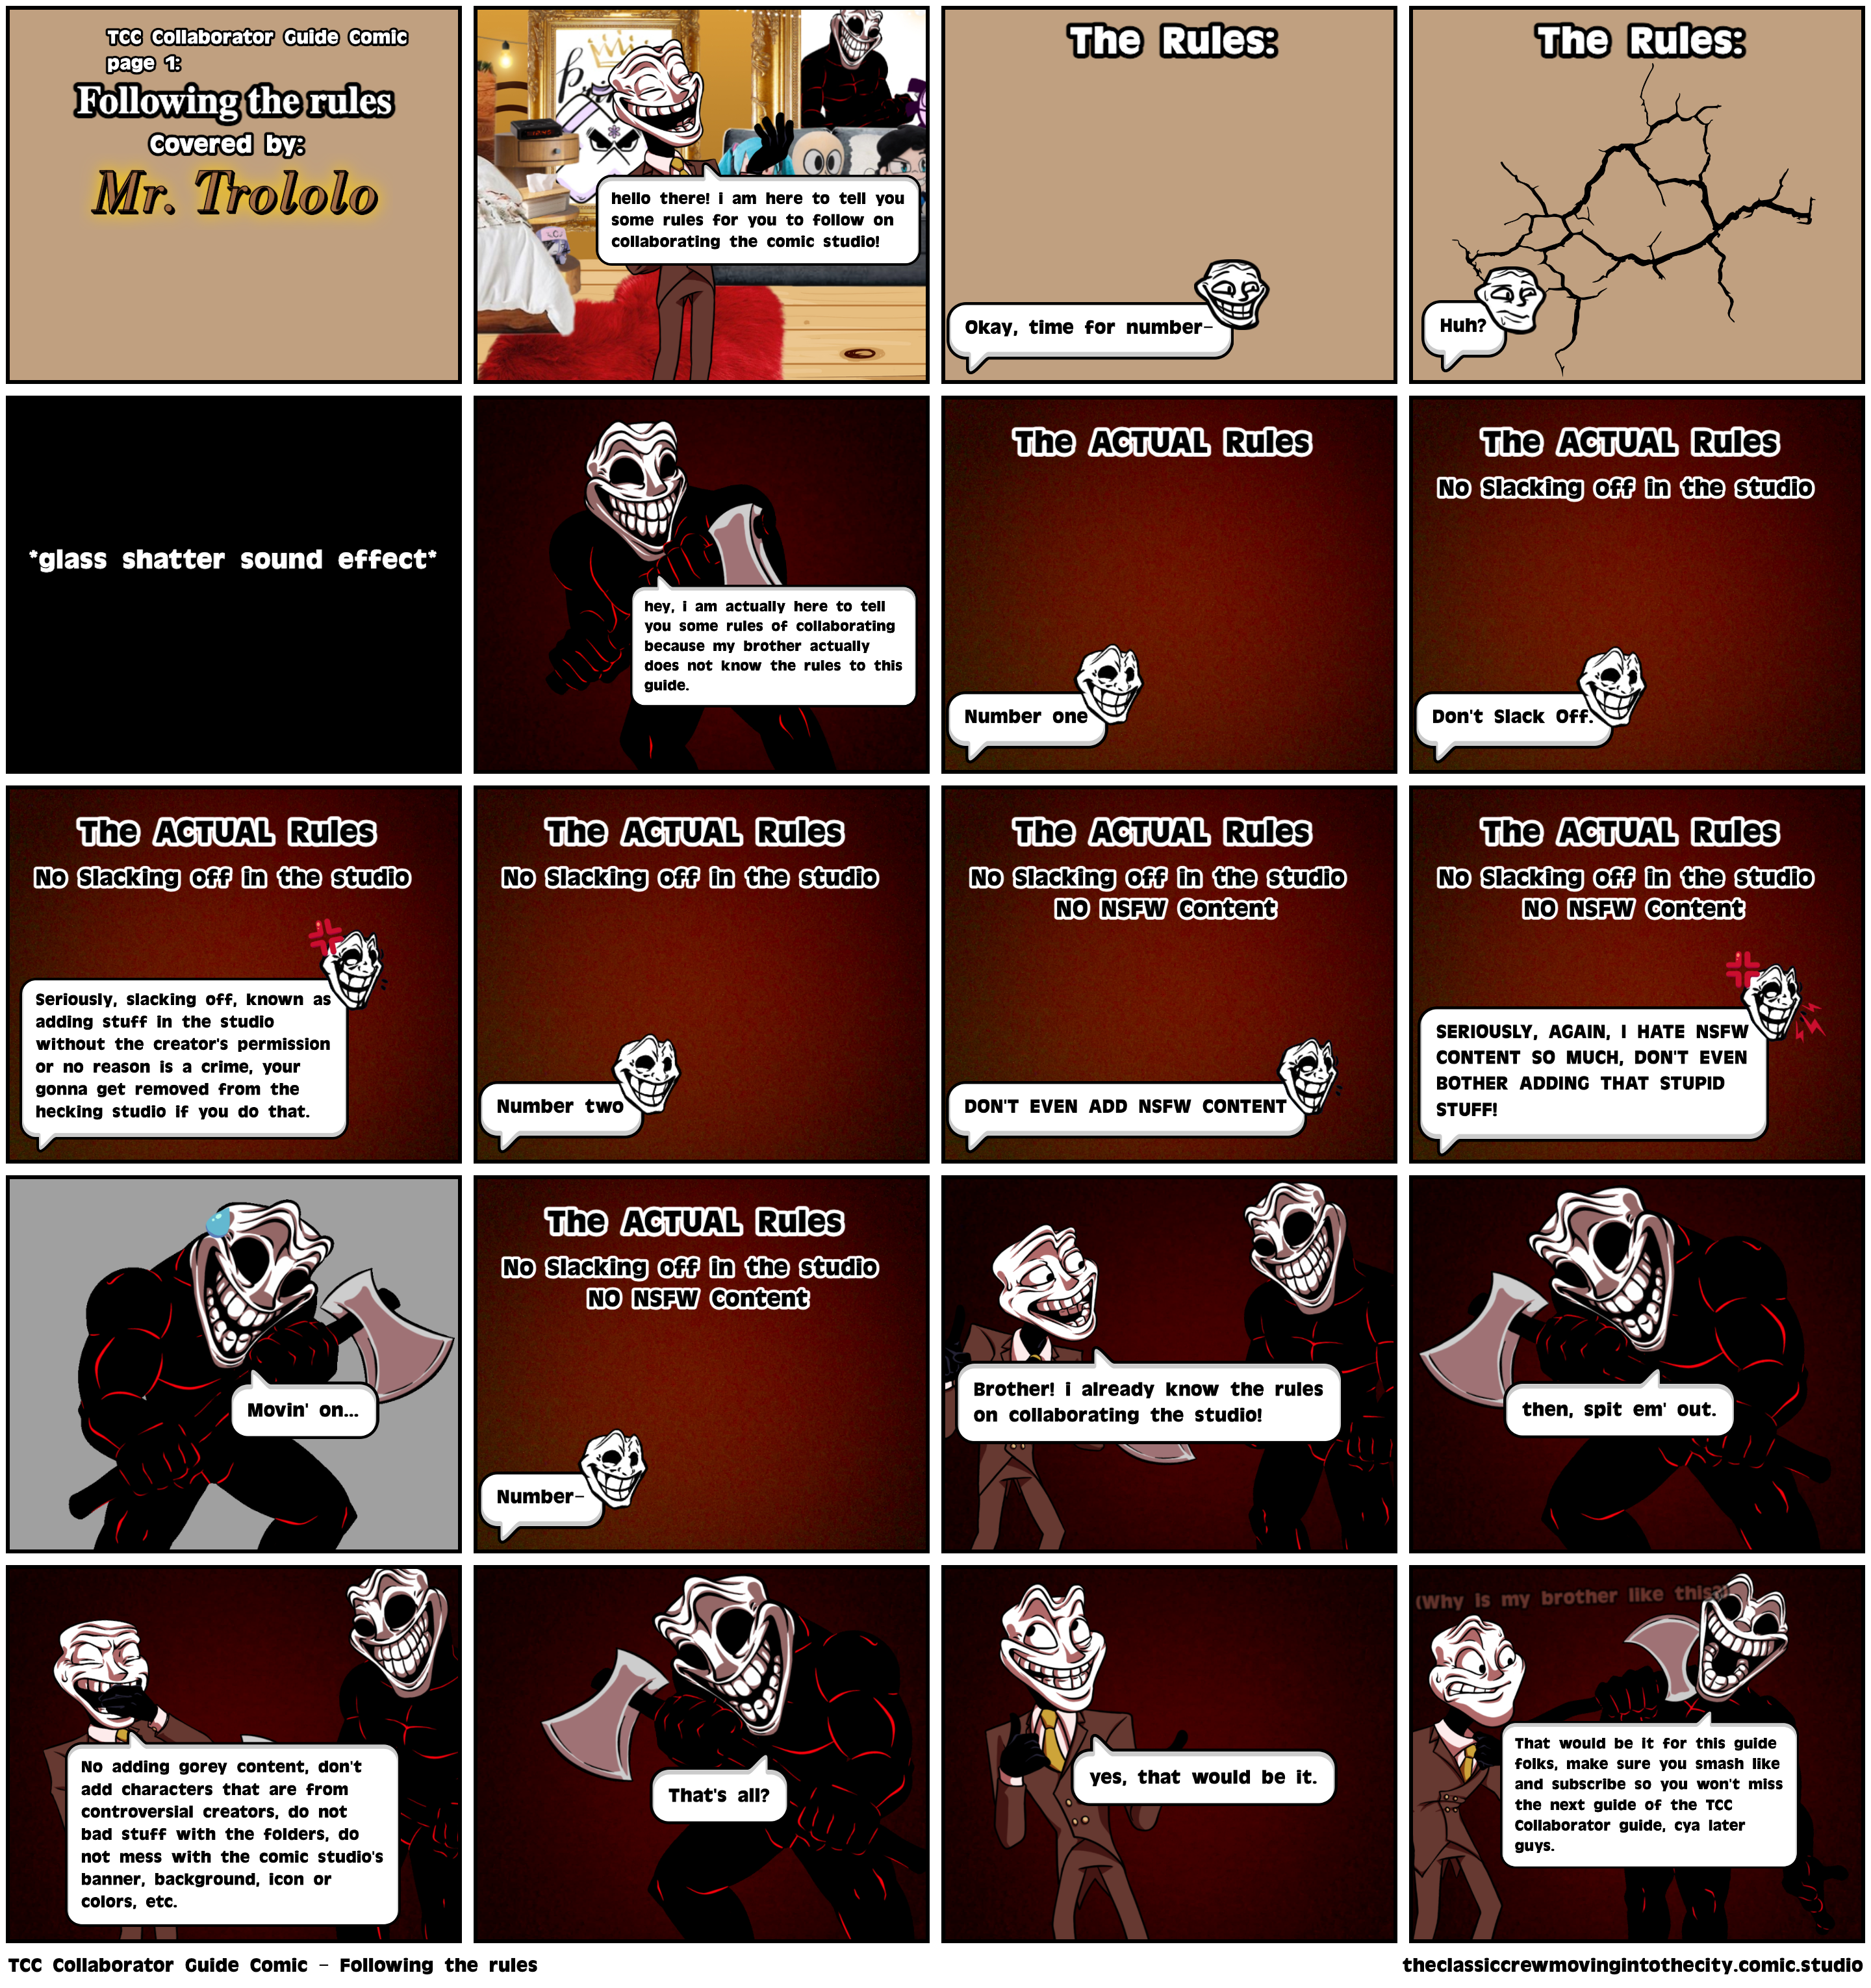 TCC Collaborator Guide Comic - Following the rules